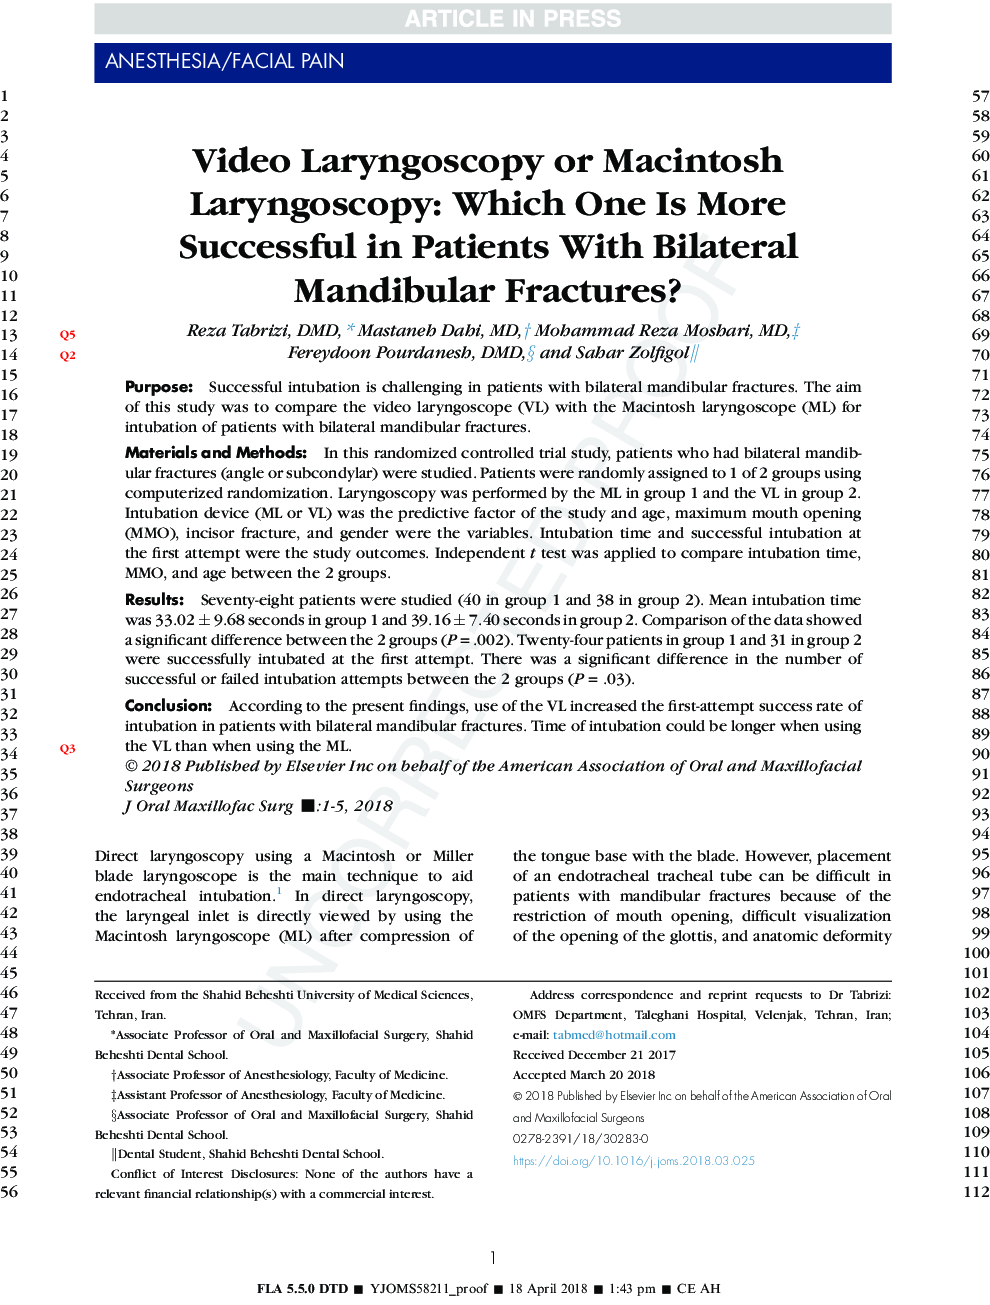 Video Laryngoscopy or Macintosh Laryngoscopy: Which One Is More Successful in Patients With Bilateral Mandibular Fractures?